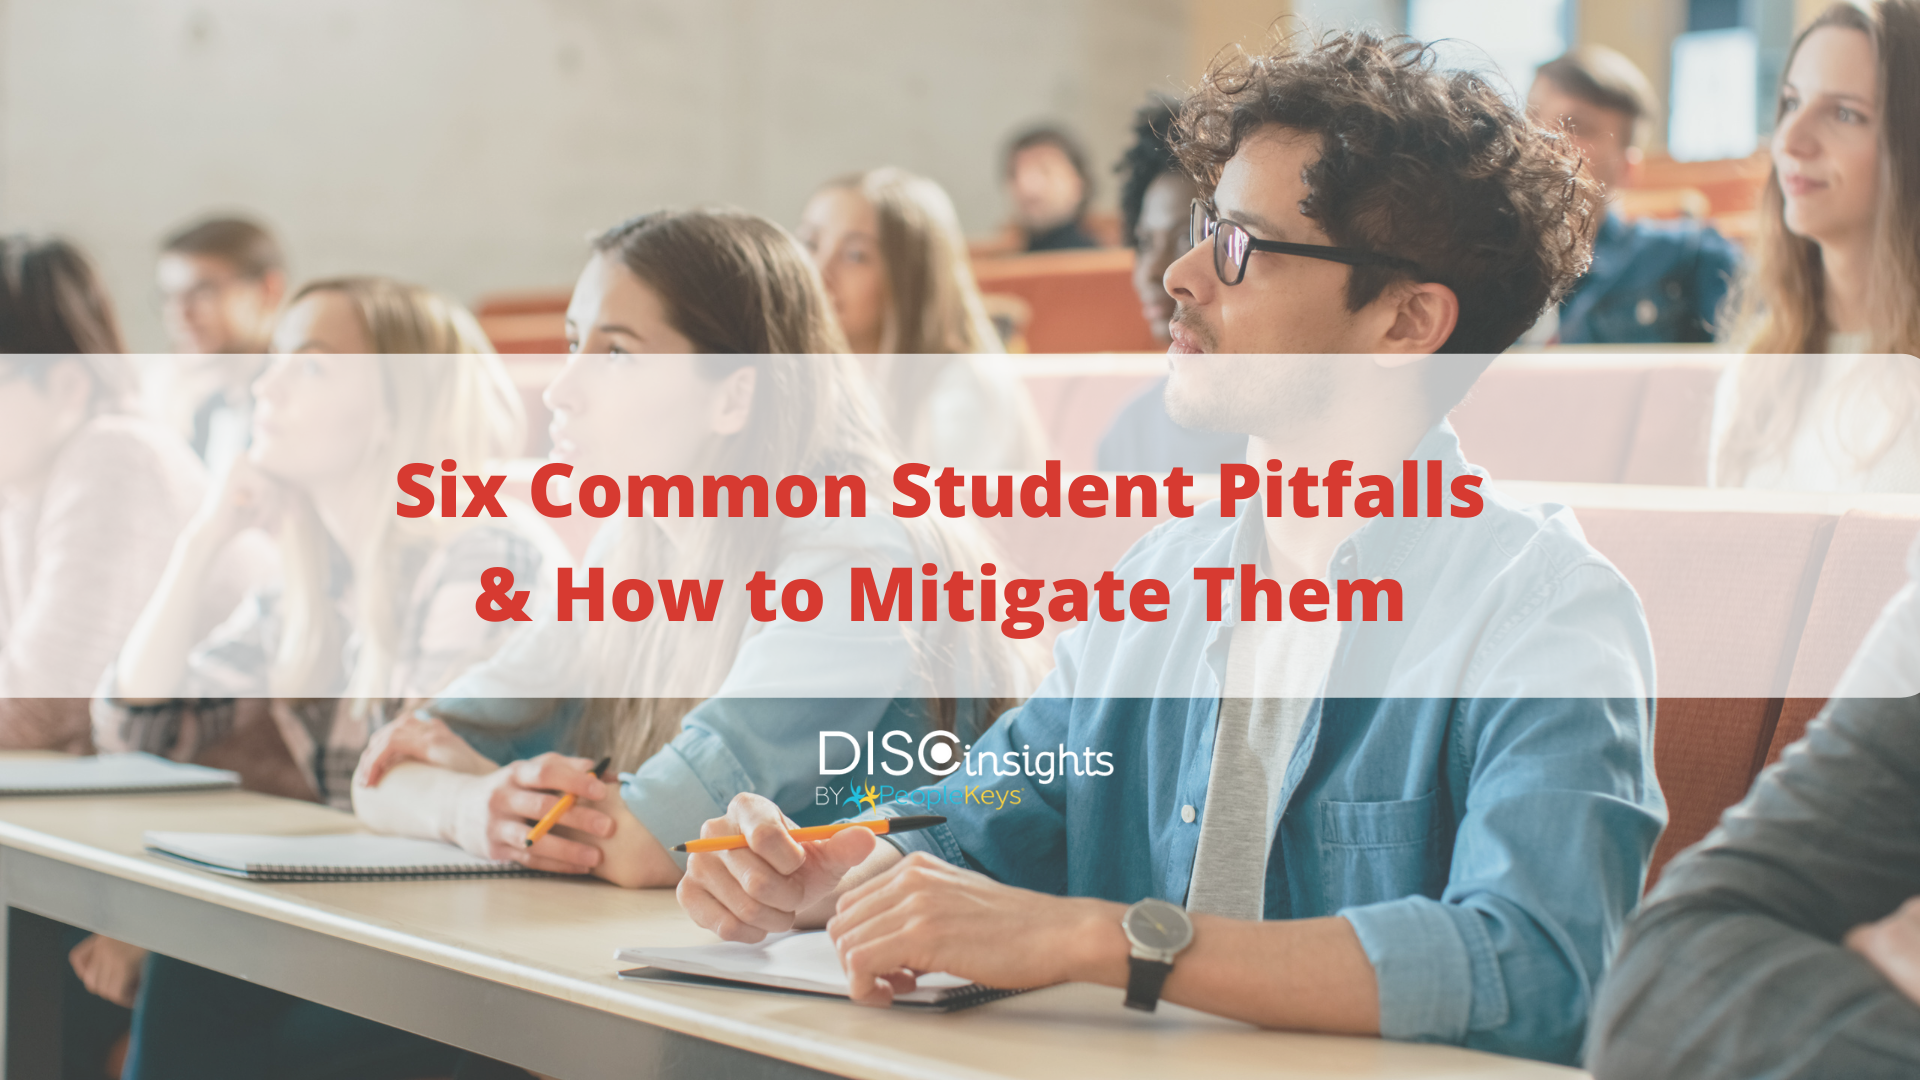 Six Common Student Pitfalls and How to Mitigate Them